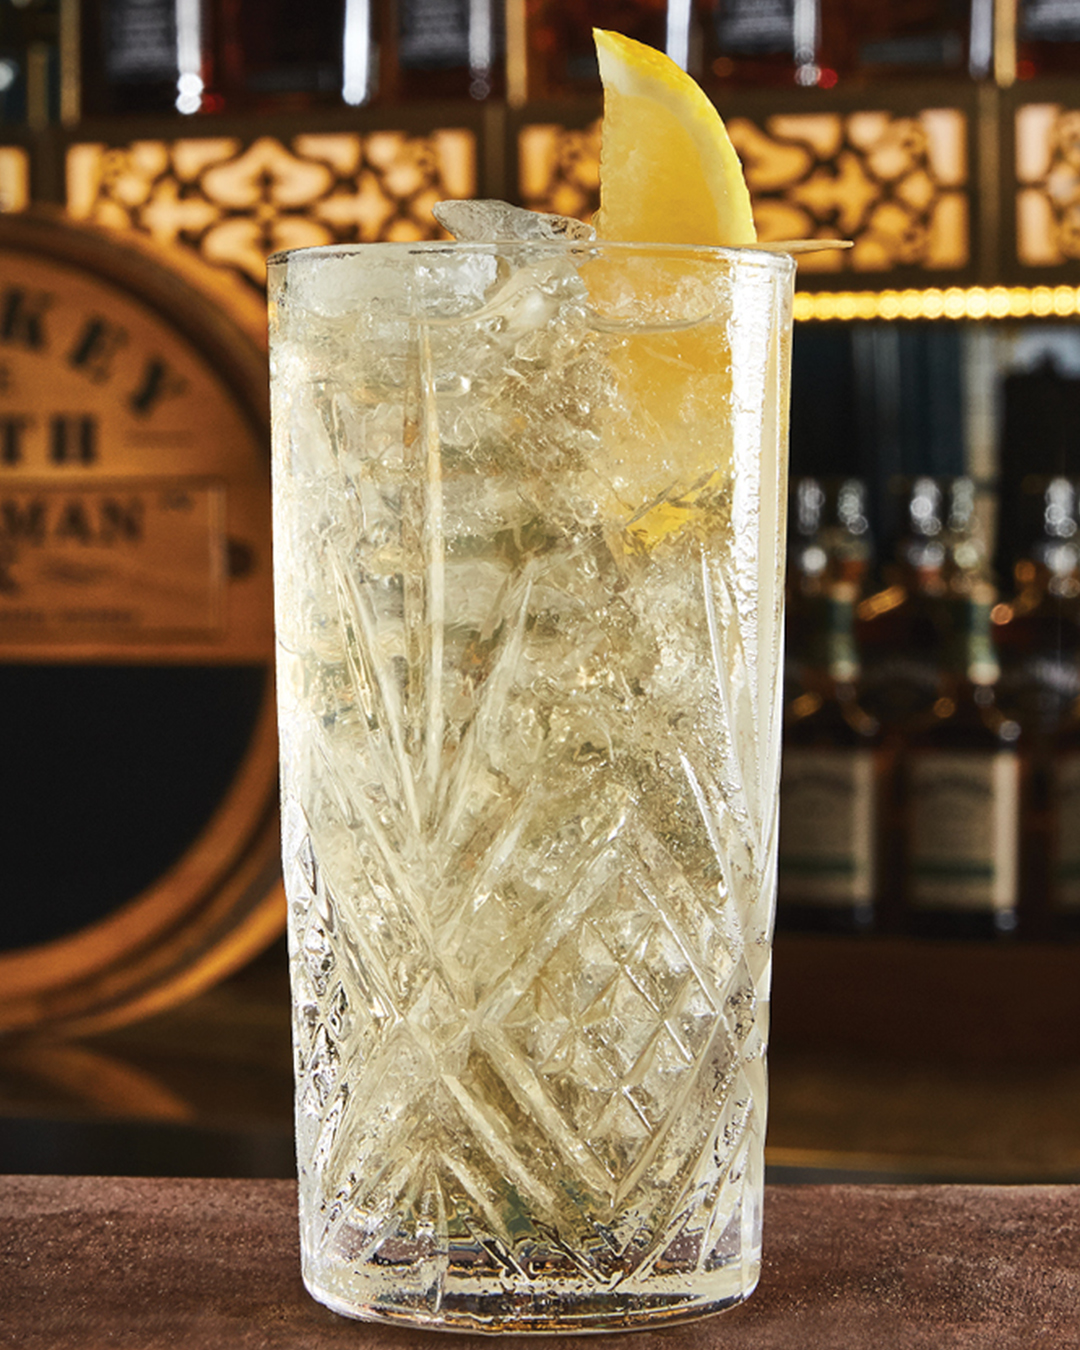 A Gentleman's Highball garnished with a lemon wedge on a bar.